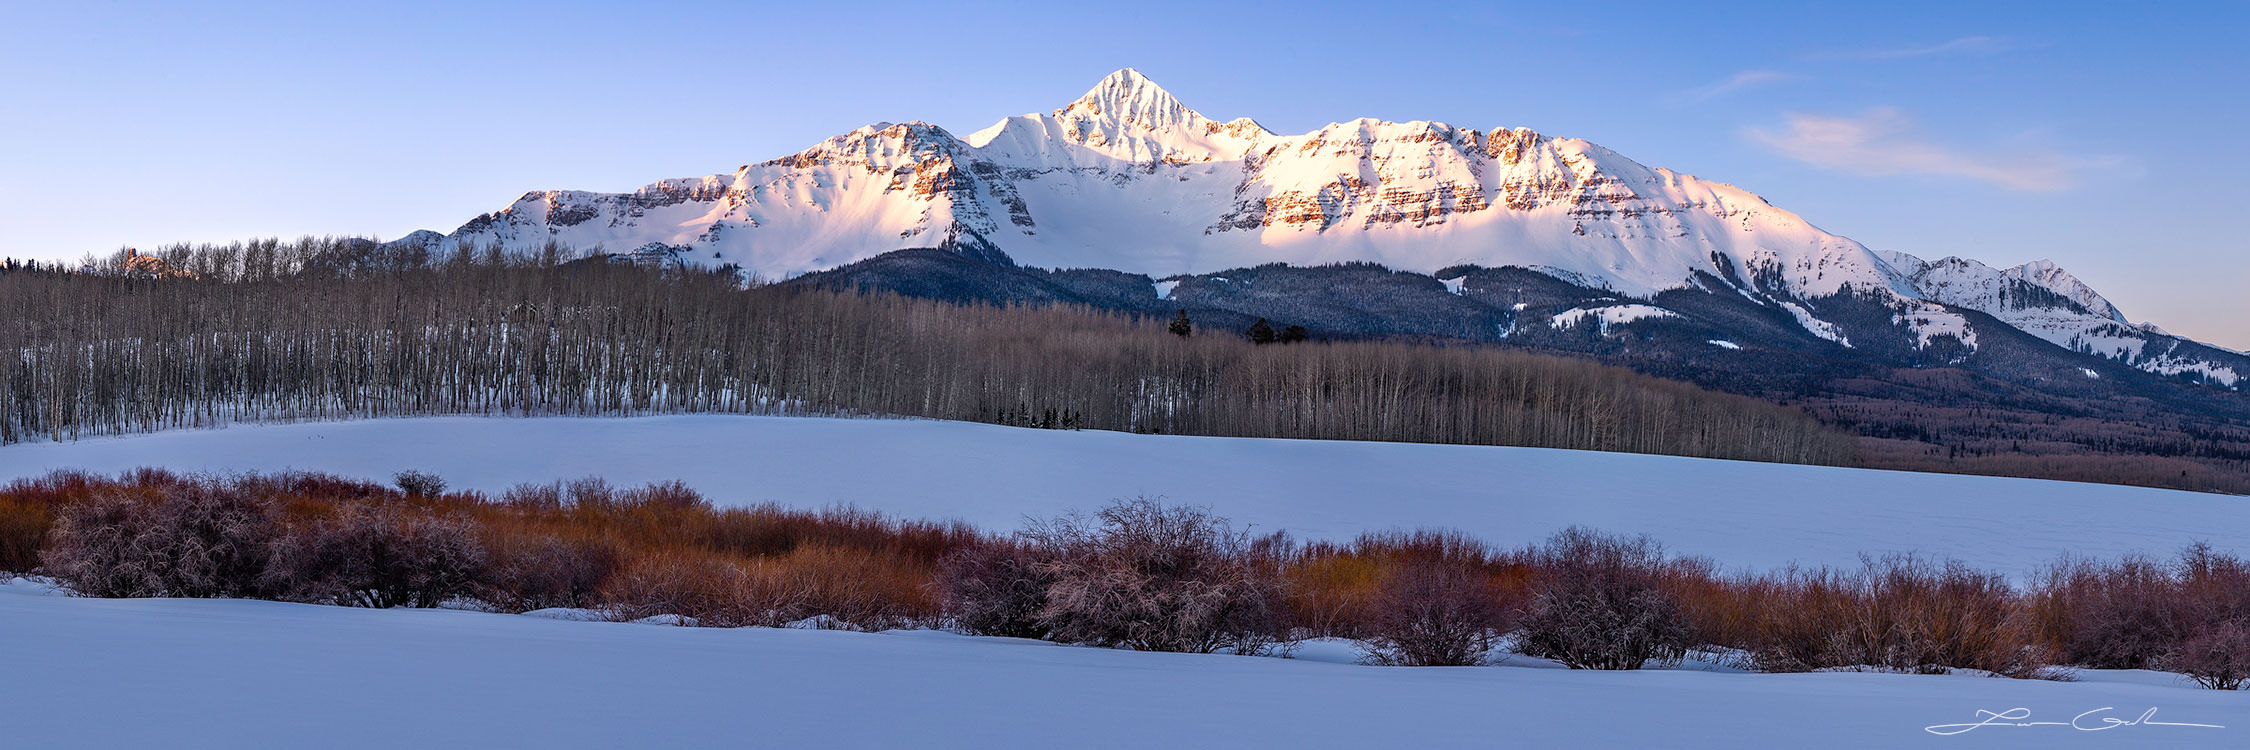 Snowfield and aspen trees in front of Wilson Peak, Telluride at sunrise